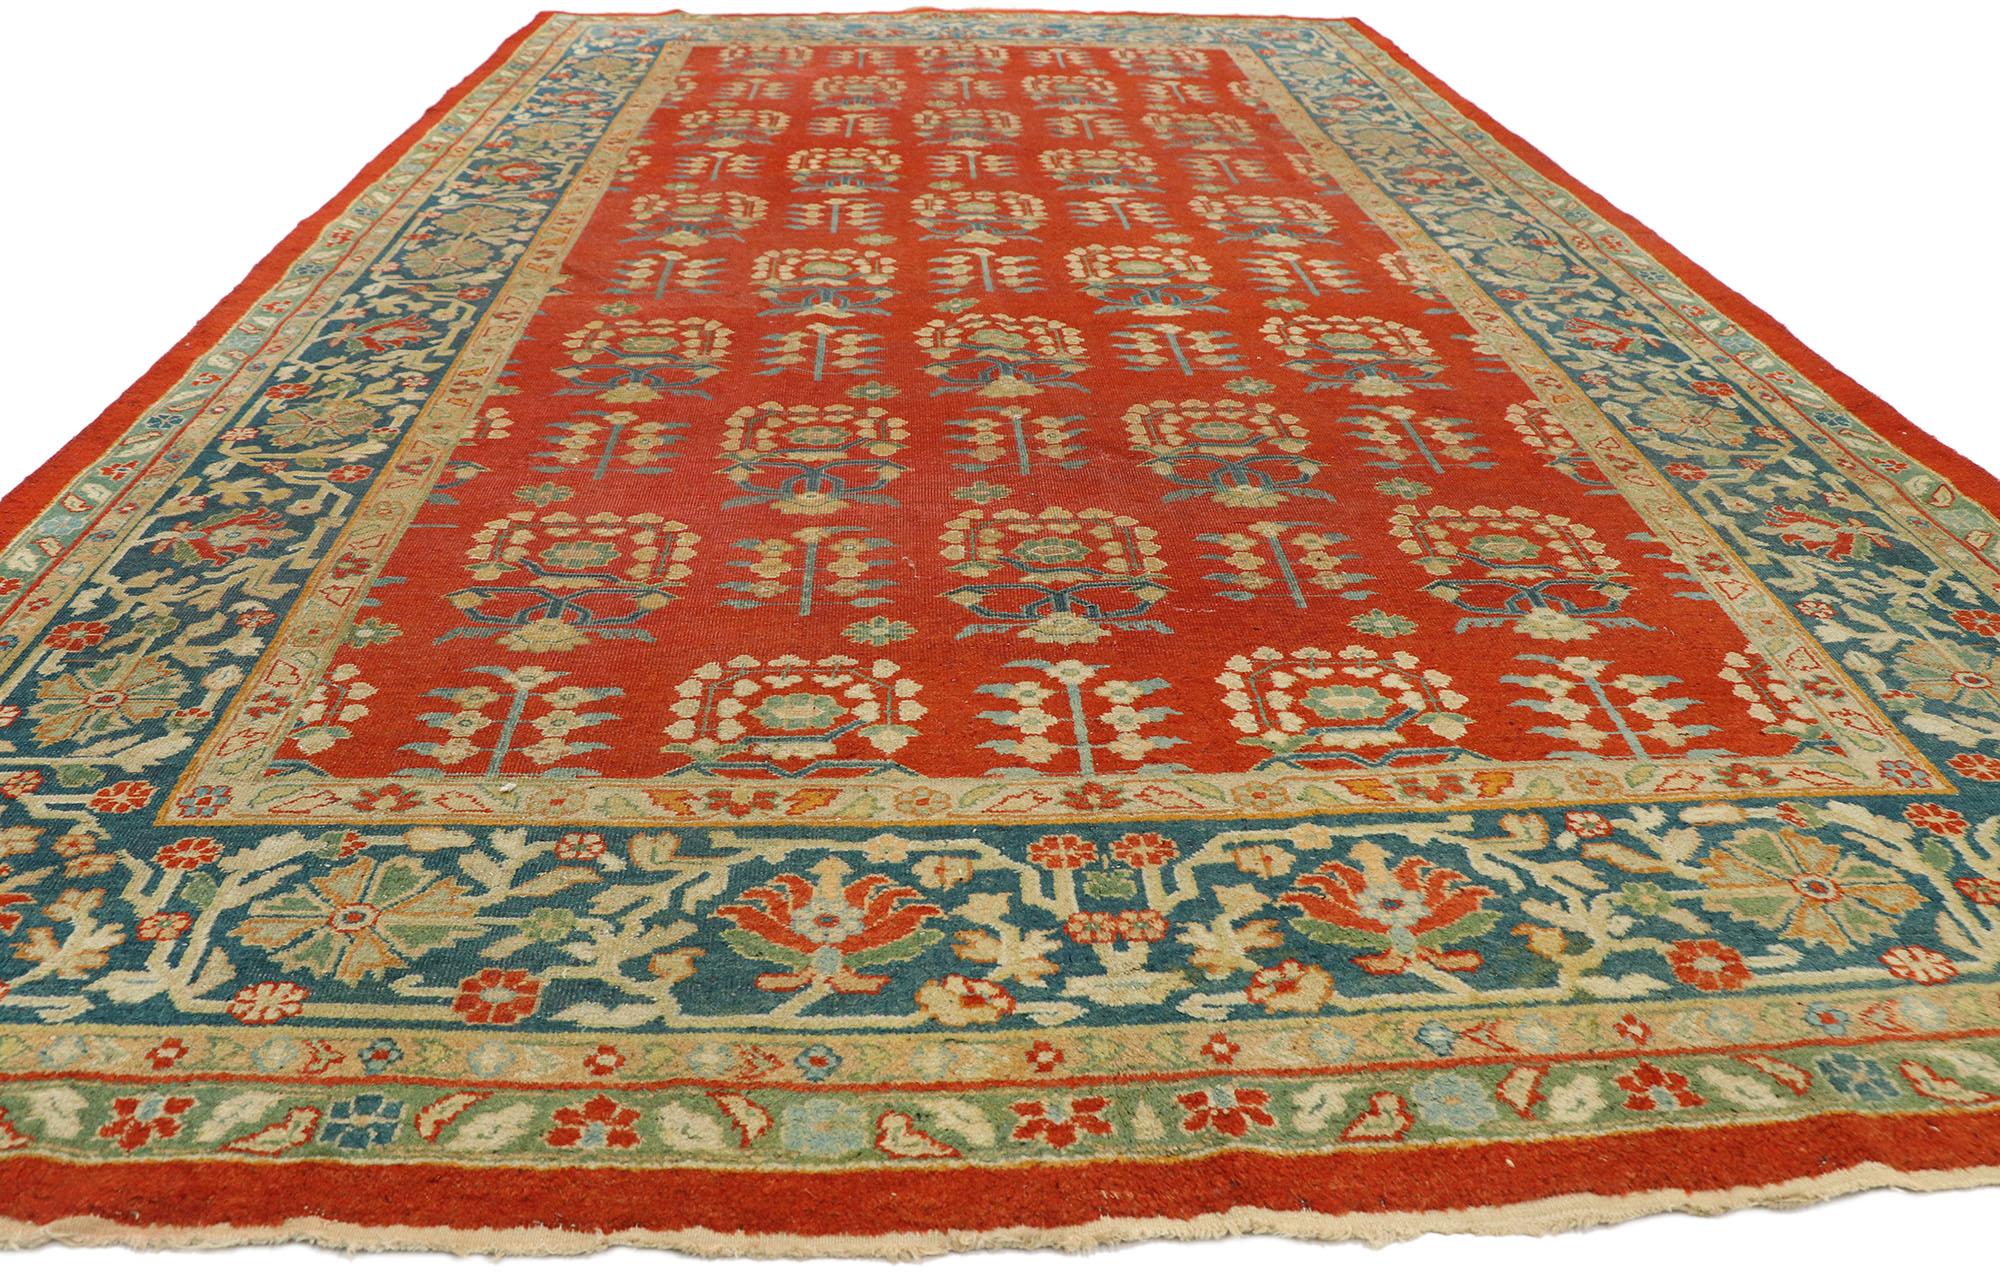 Hand-Knotted Antique Red Indian Agra Rug 